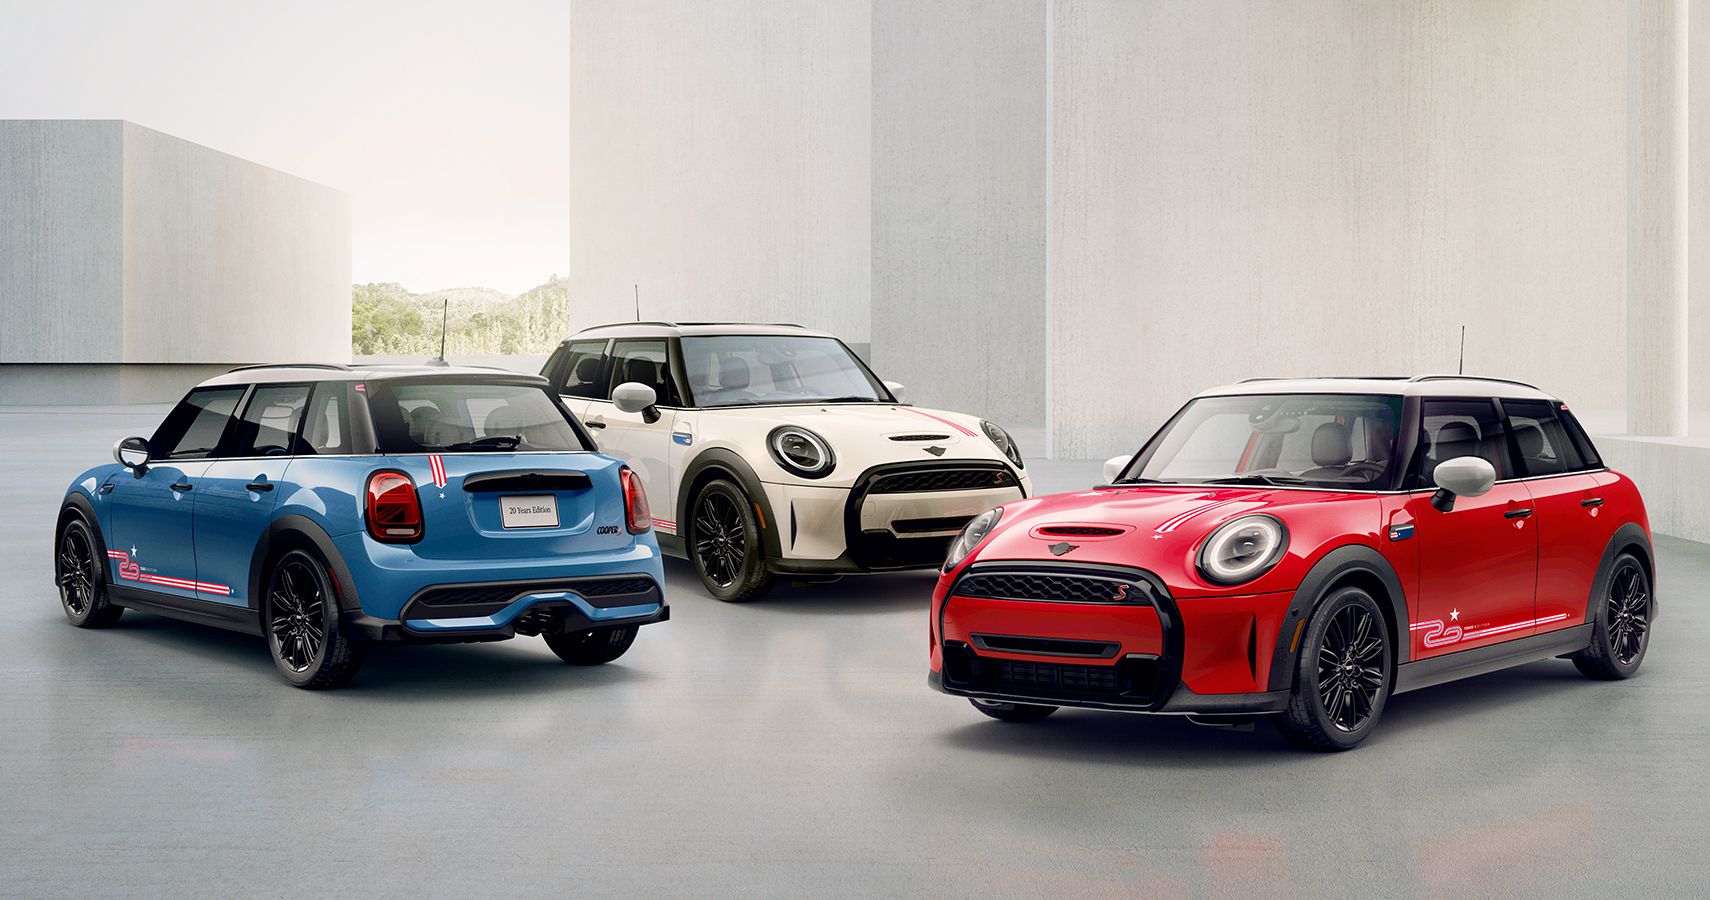 Driving The Mini eMastered, The Ultimate Eye Candy City Car